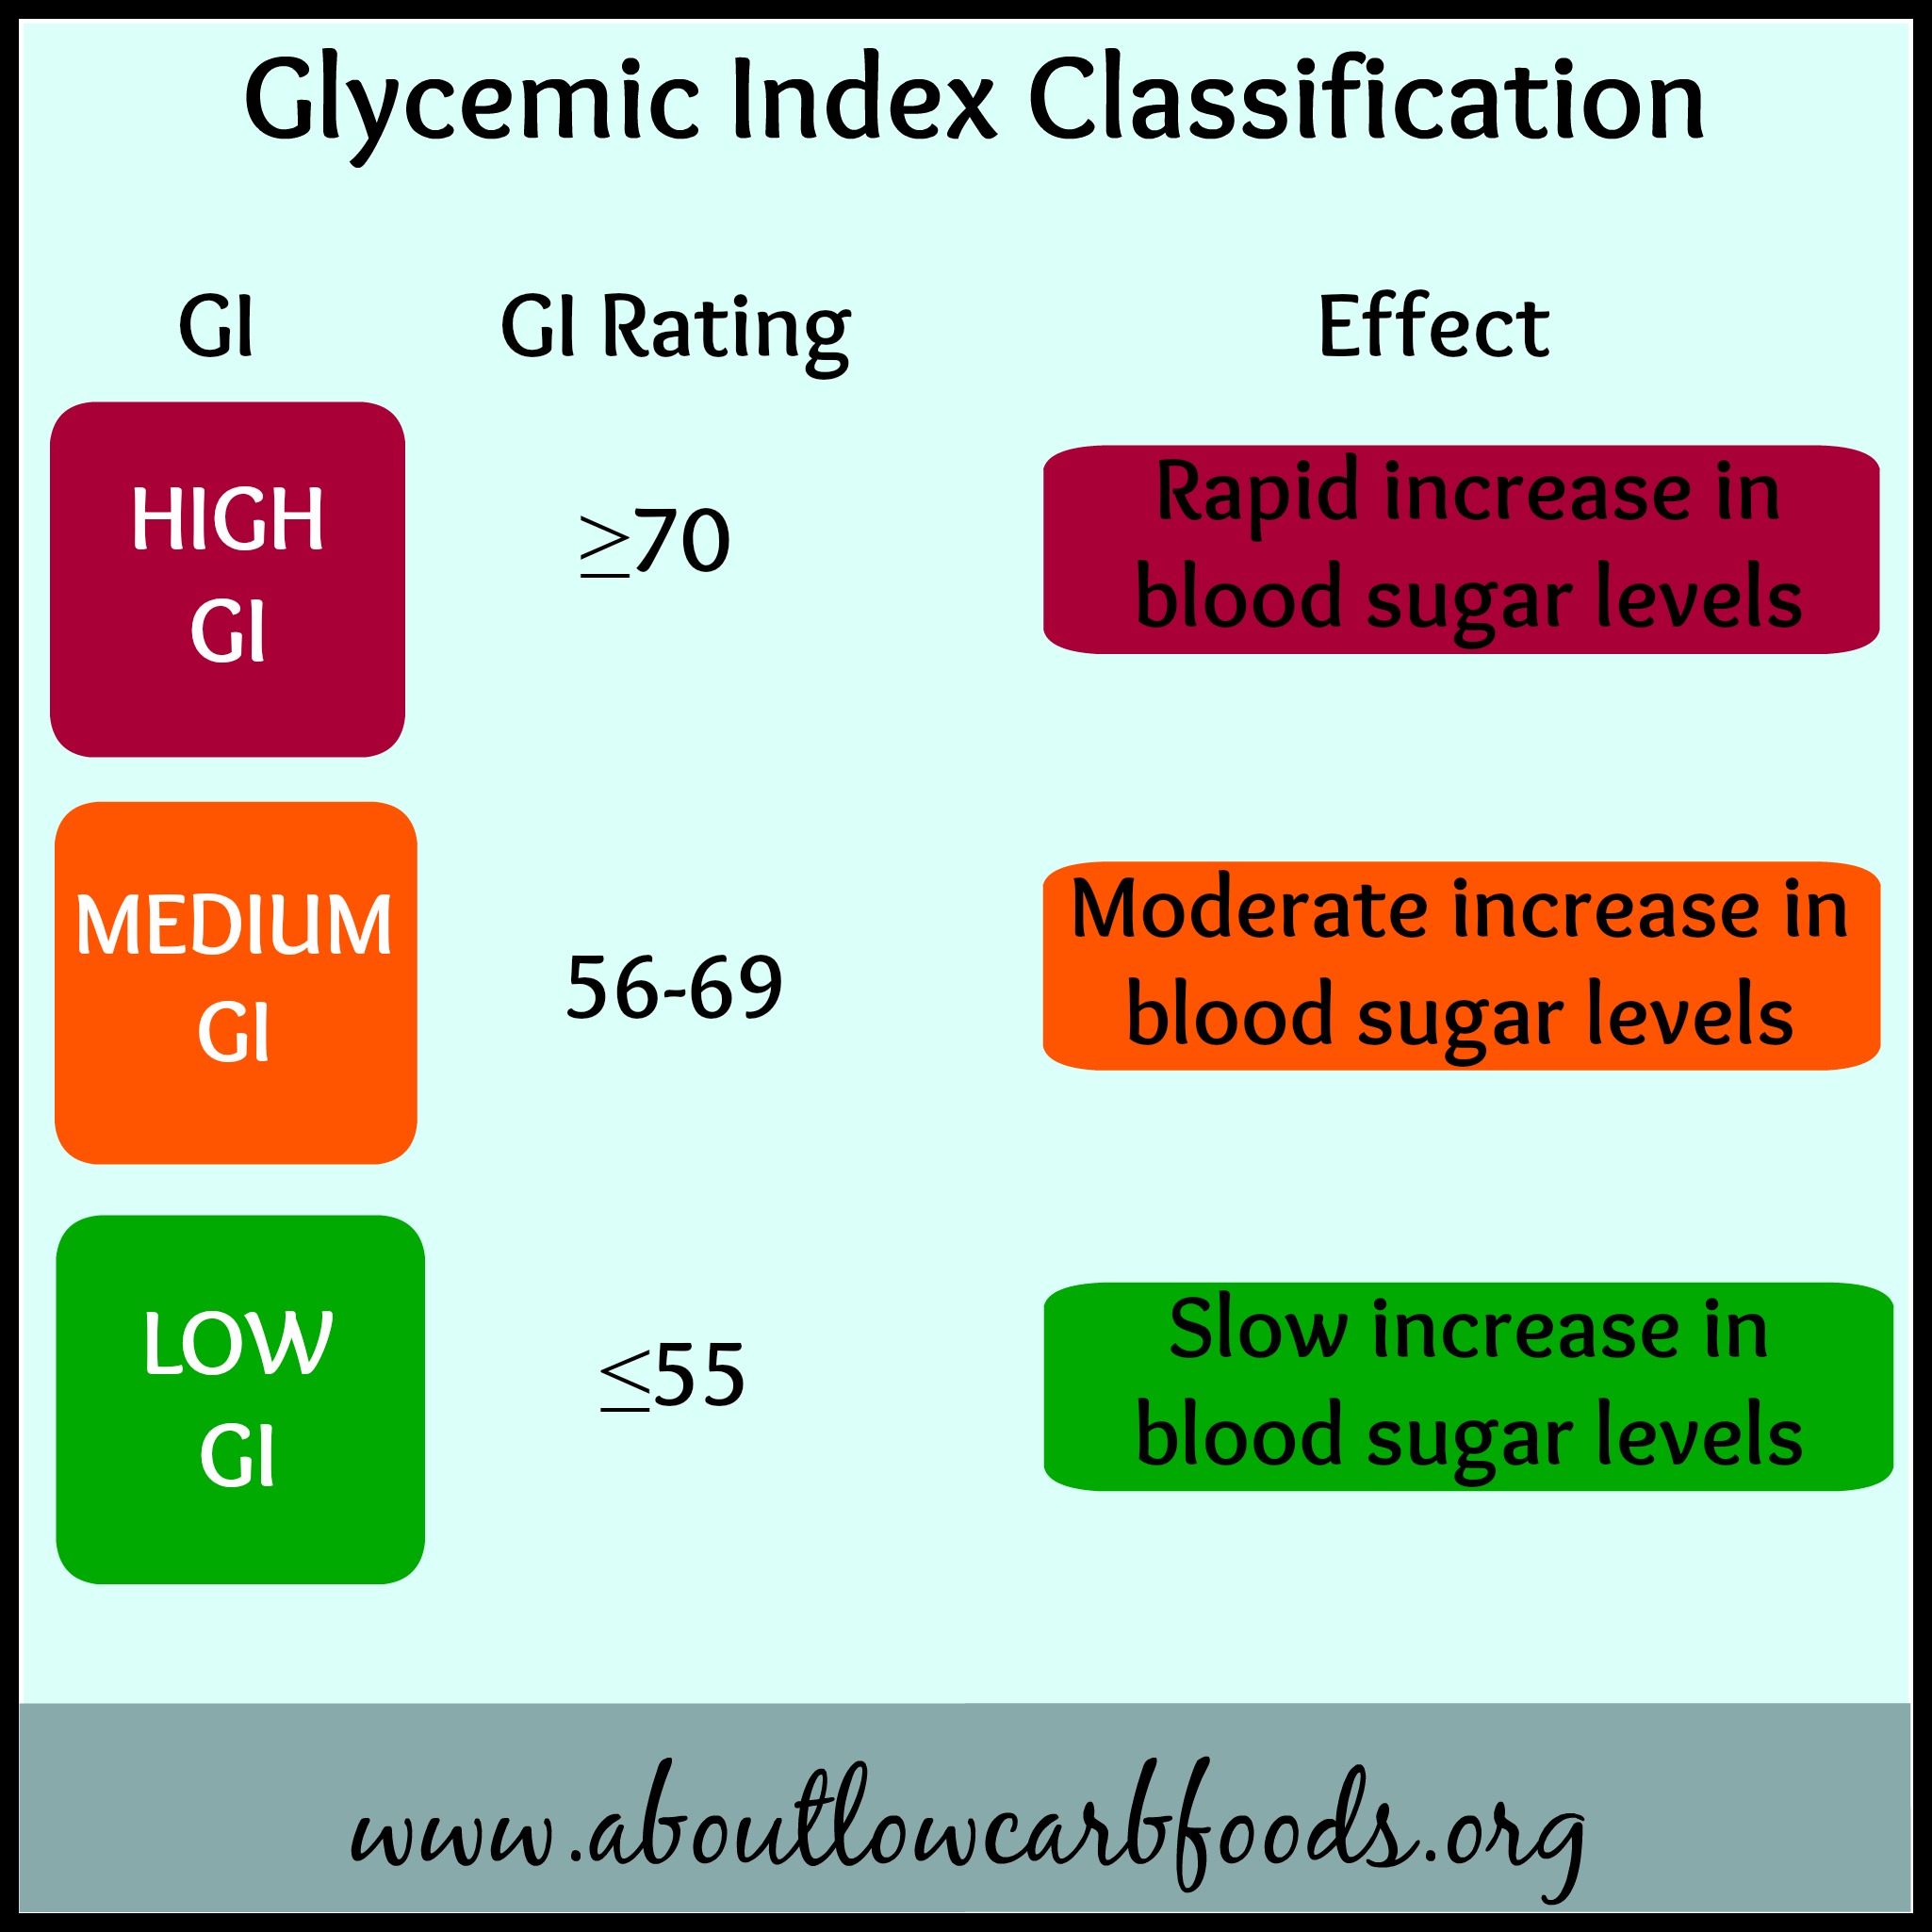 Glycemic index classification